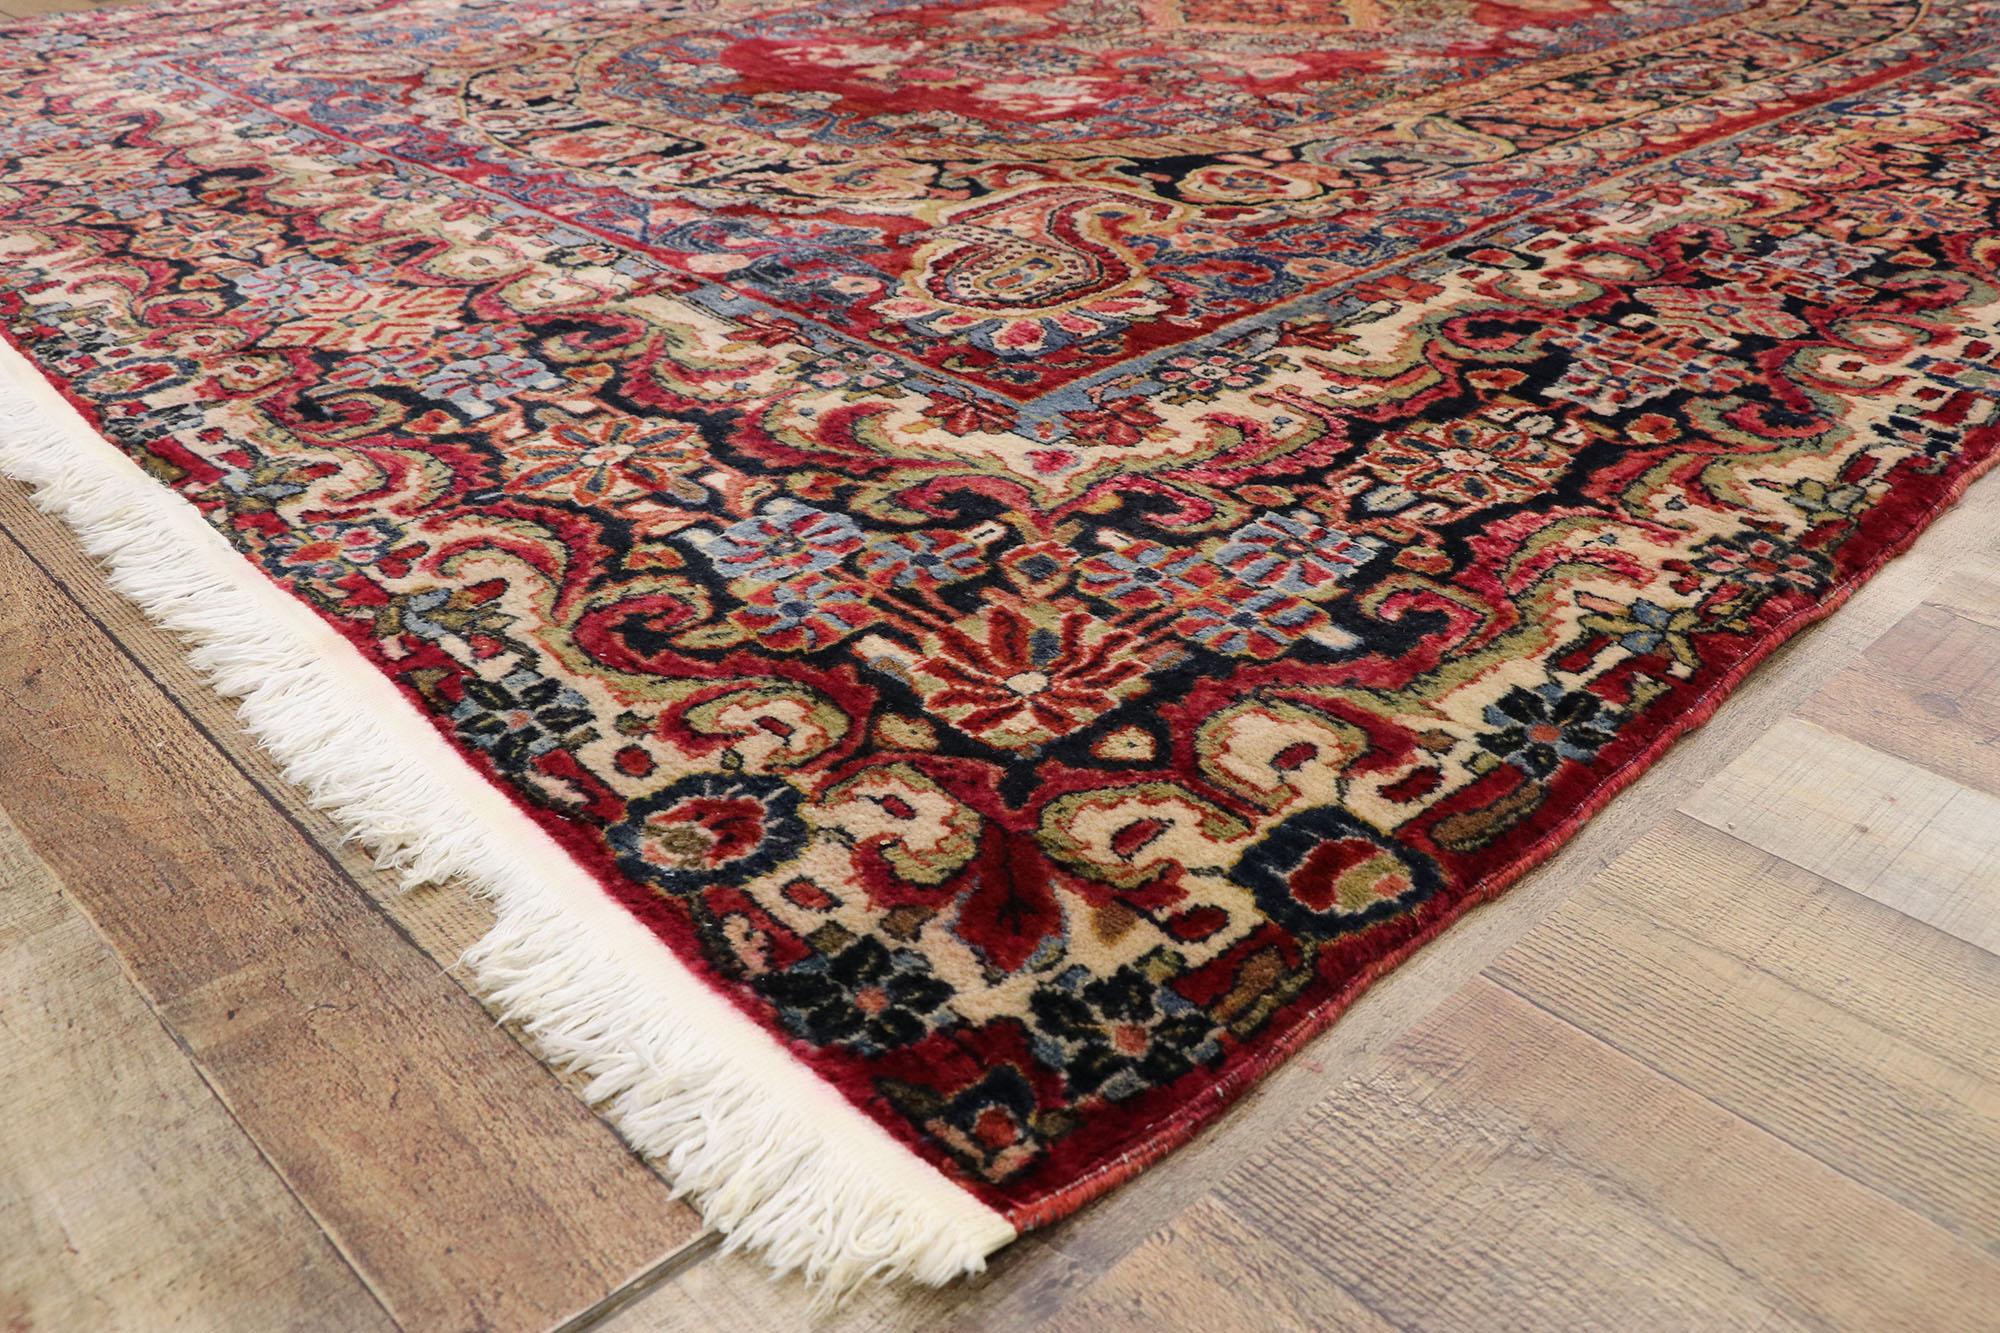 20th Century Antique Persian Sarouk Rug with Floral Victorian Style